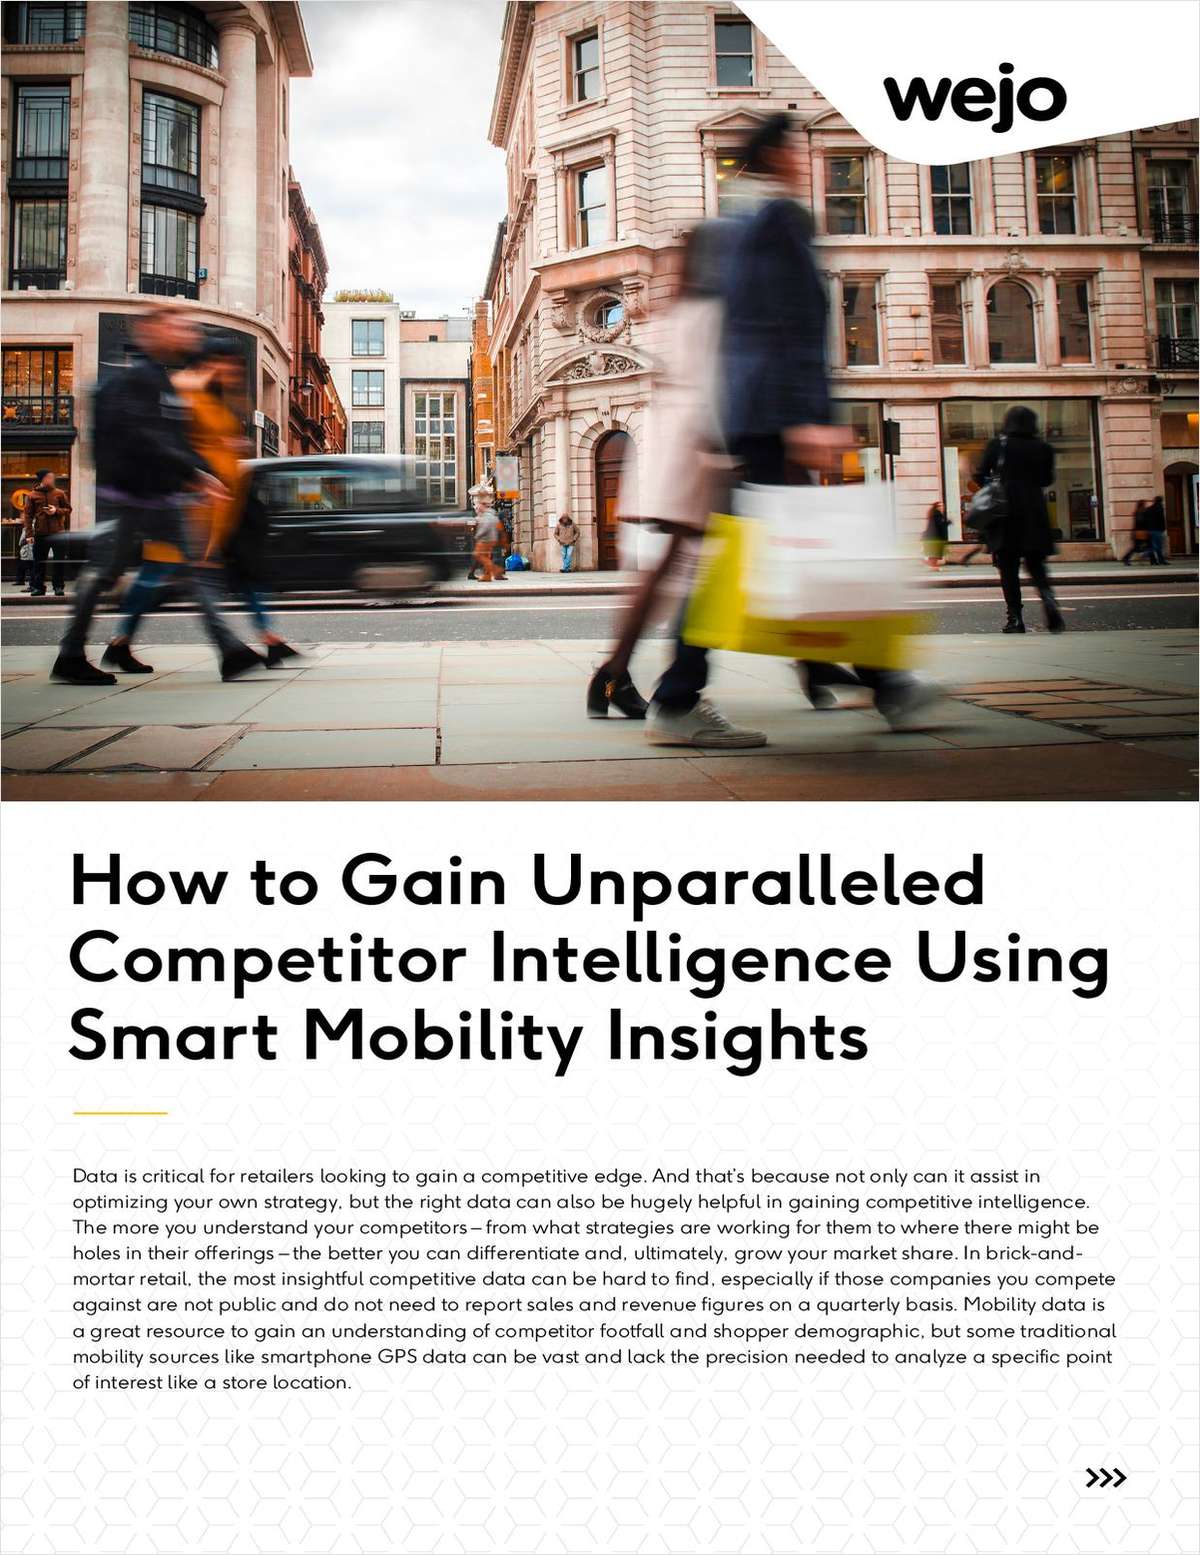 How Retailers Can Gain Competitor Intelligence Using Smart Mobility Insights